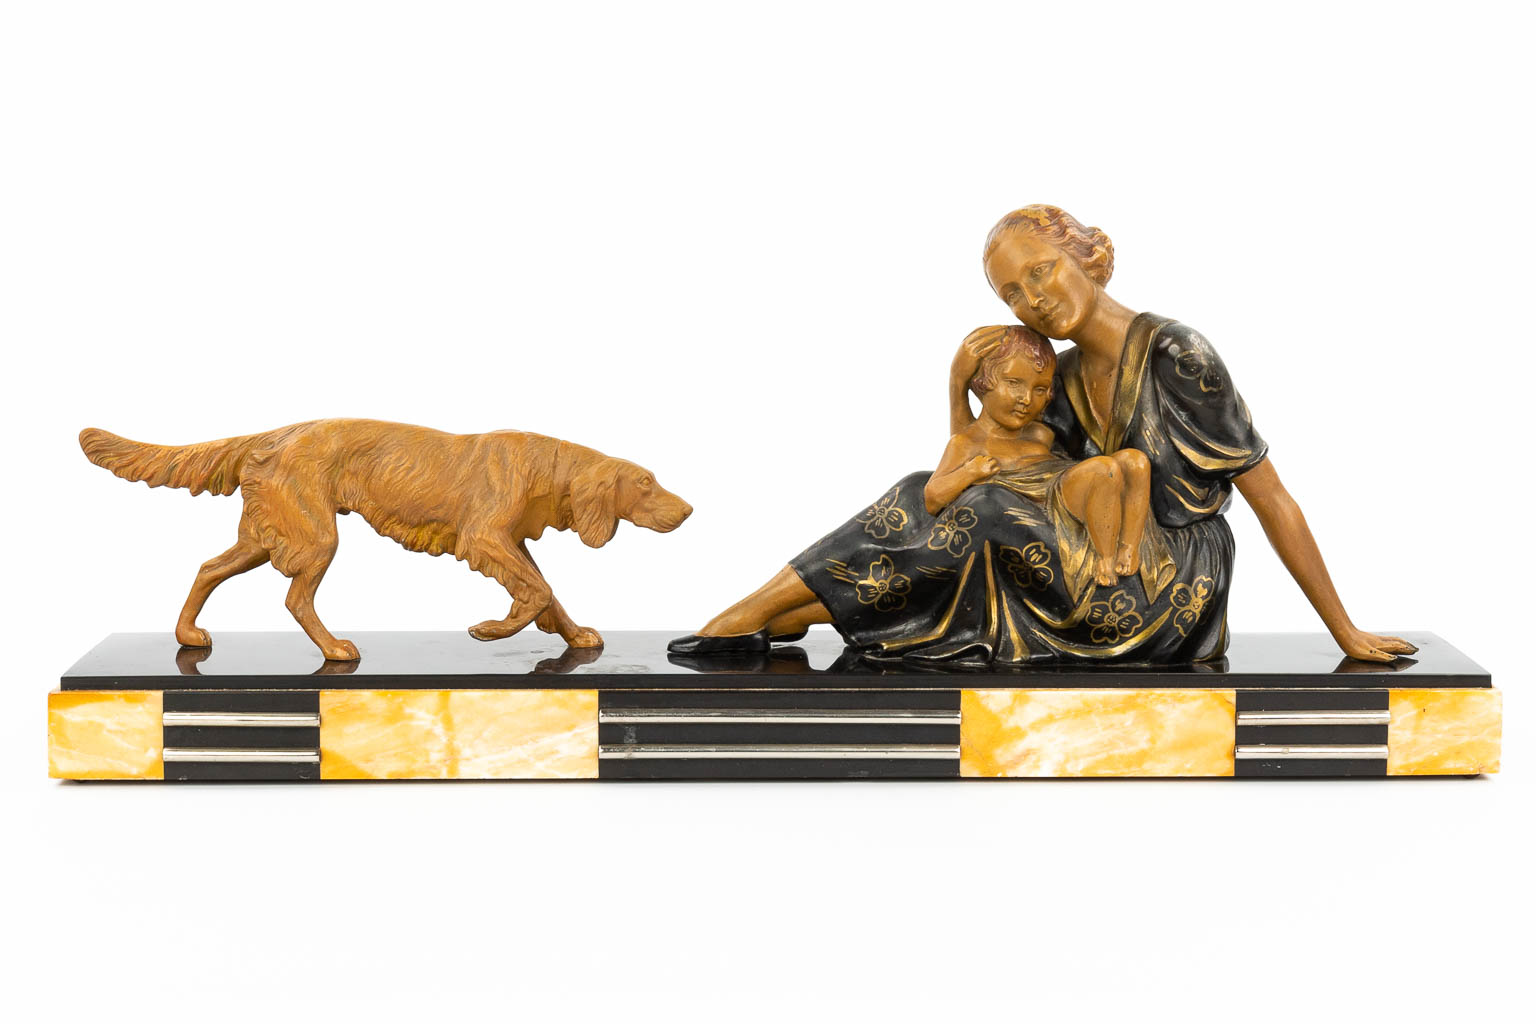 An art deco style statue of a woman with child and her dog, made of spelter and mounted on a marble base. (H:26,5cm)